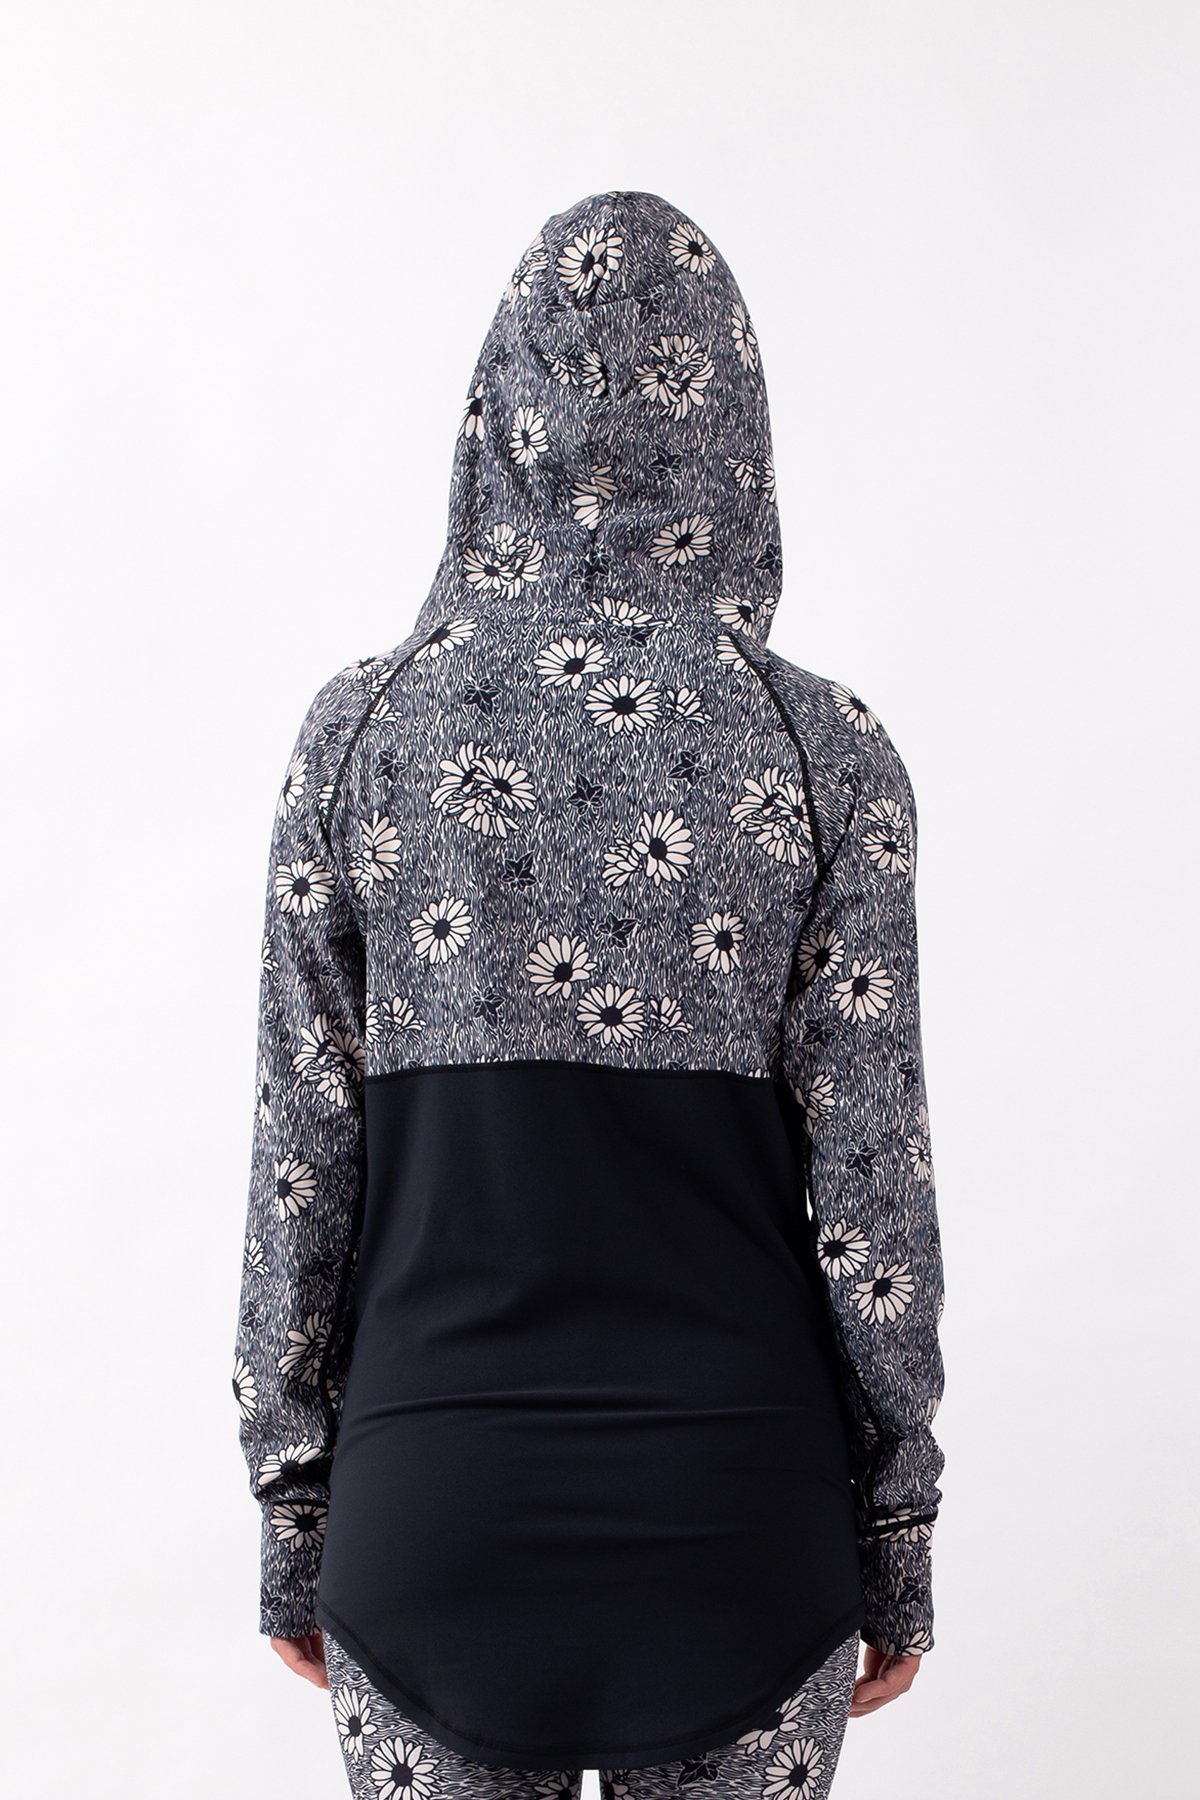 Base Layer | Icecold Hoodie Top - Ivy Blossom | XL